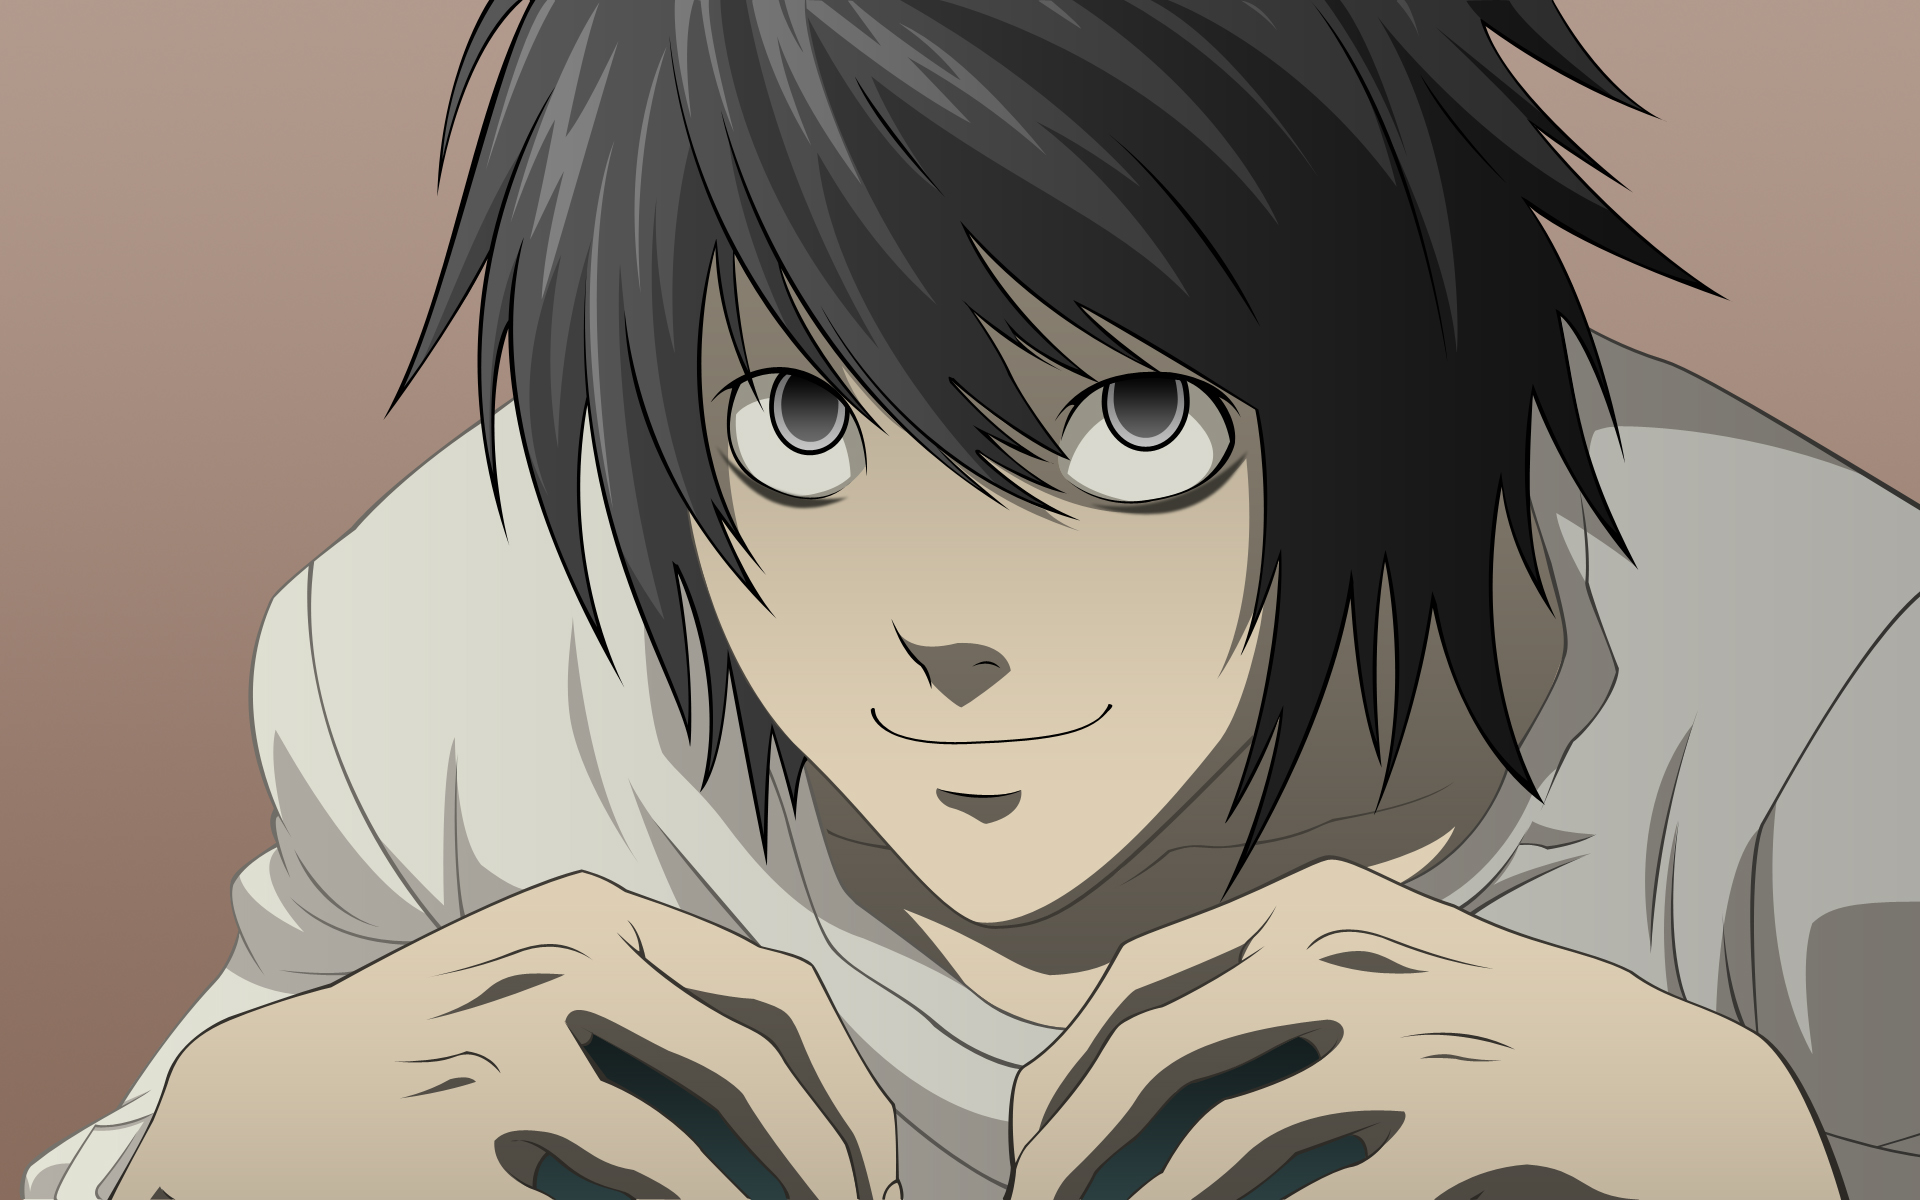 Death Note anime character with intense expression.